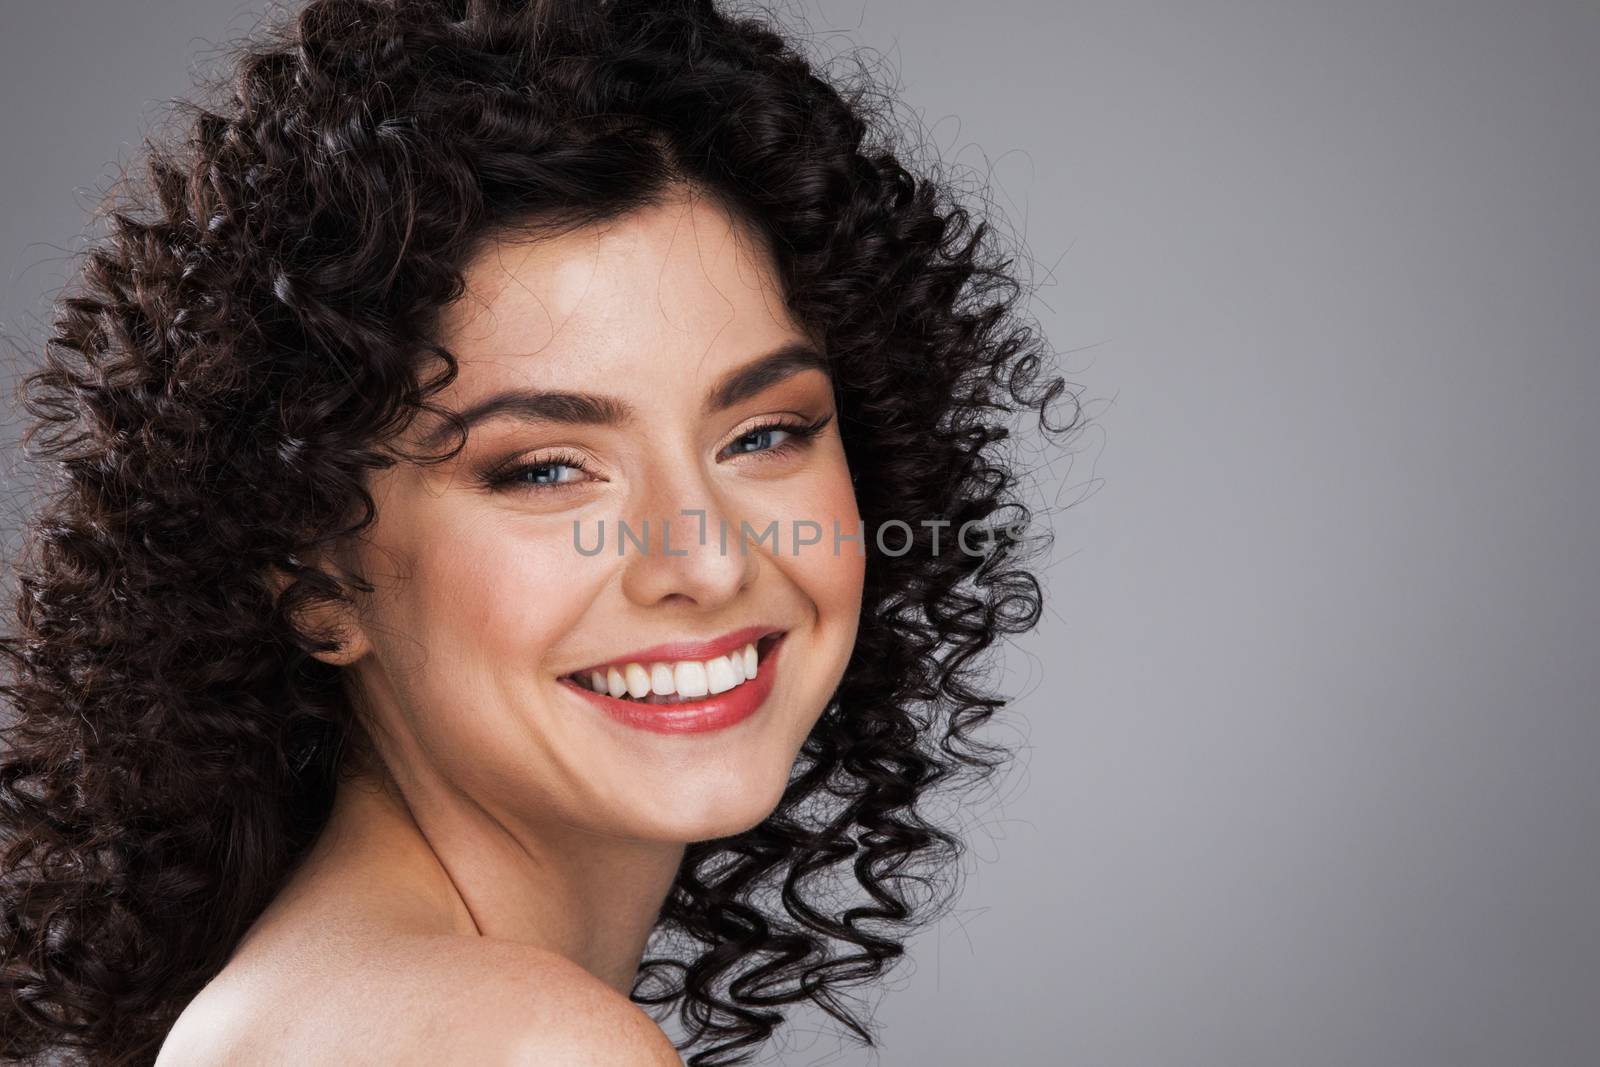 Smiling woman with curls hairstyle by Yellowj